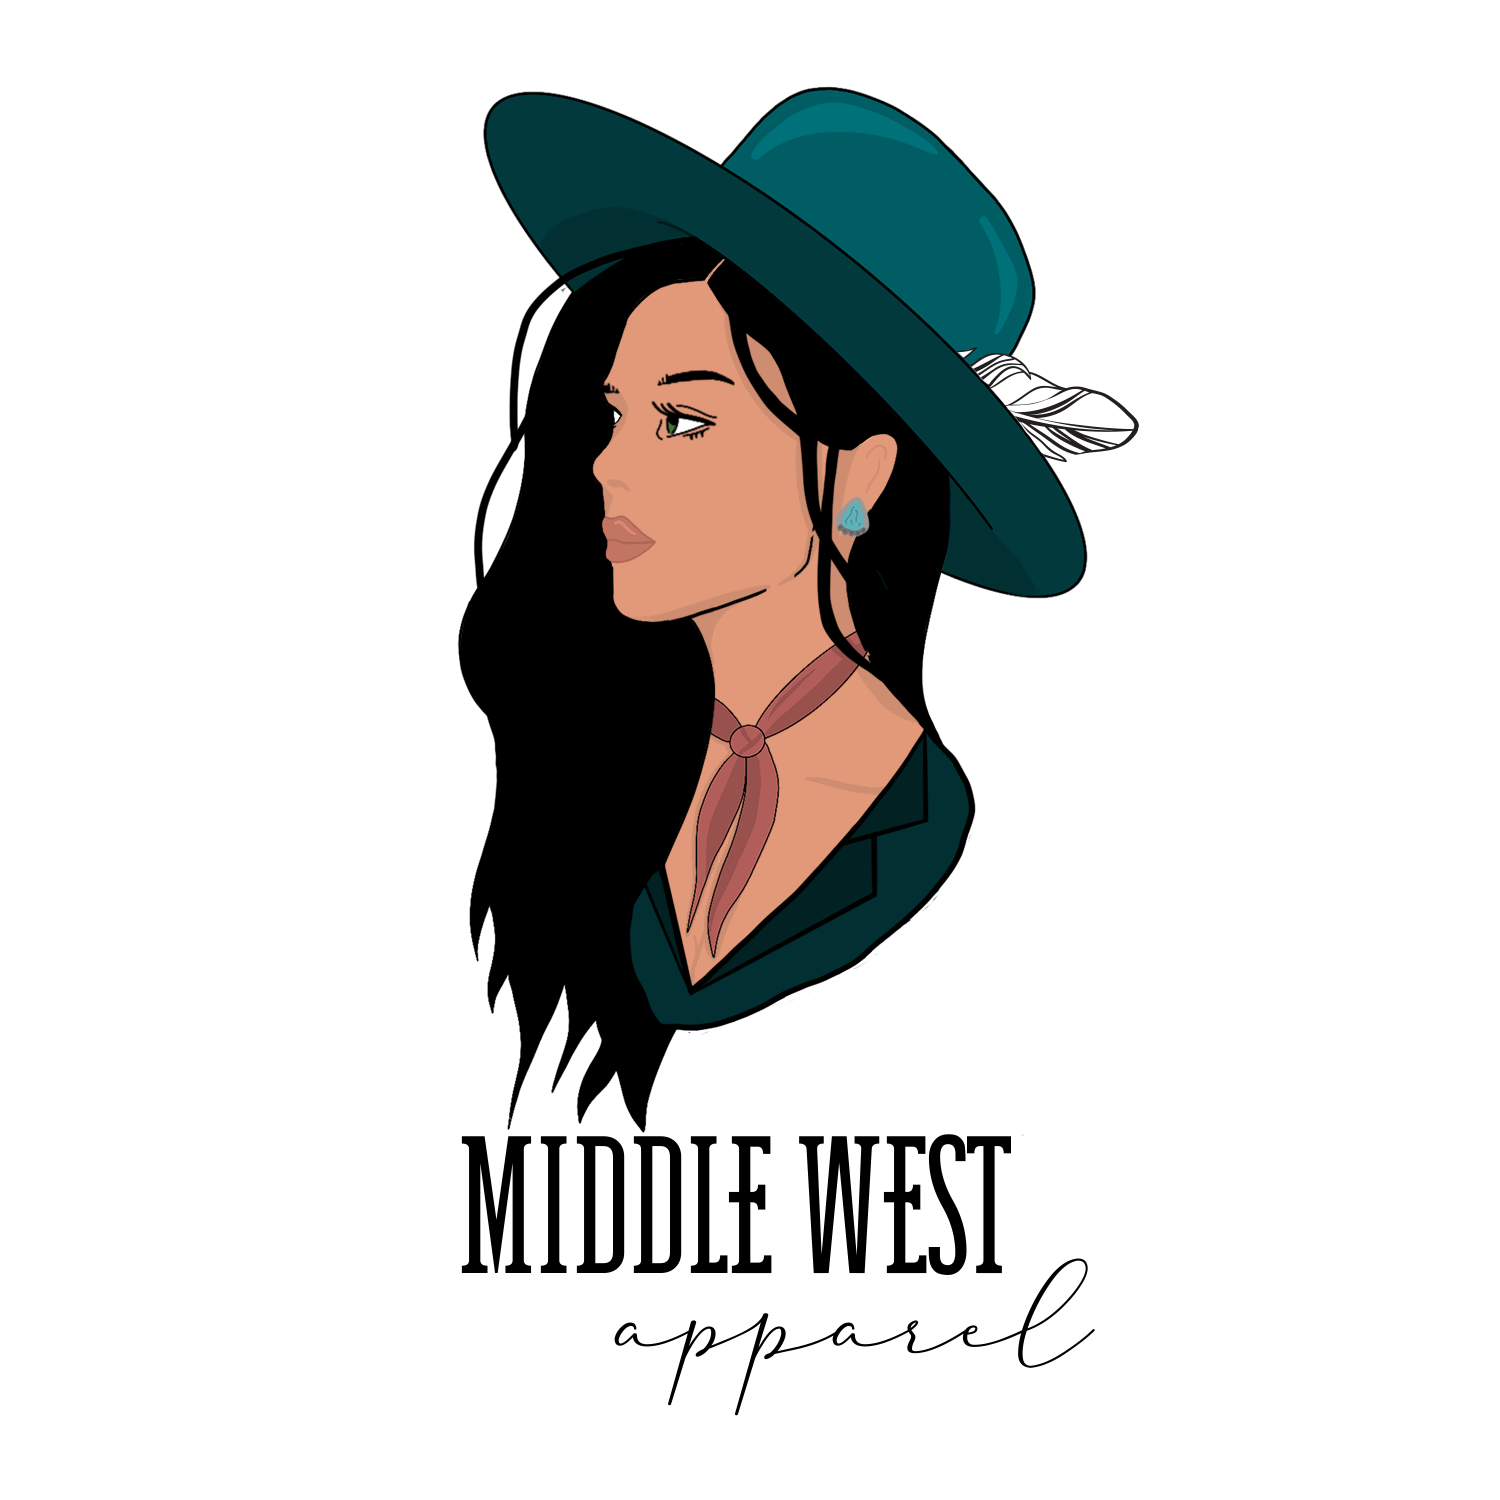 Middle West Apparel